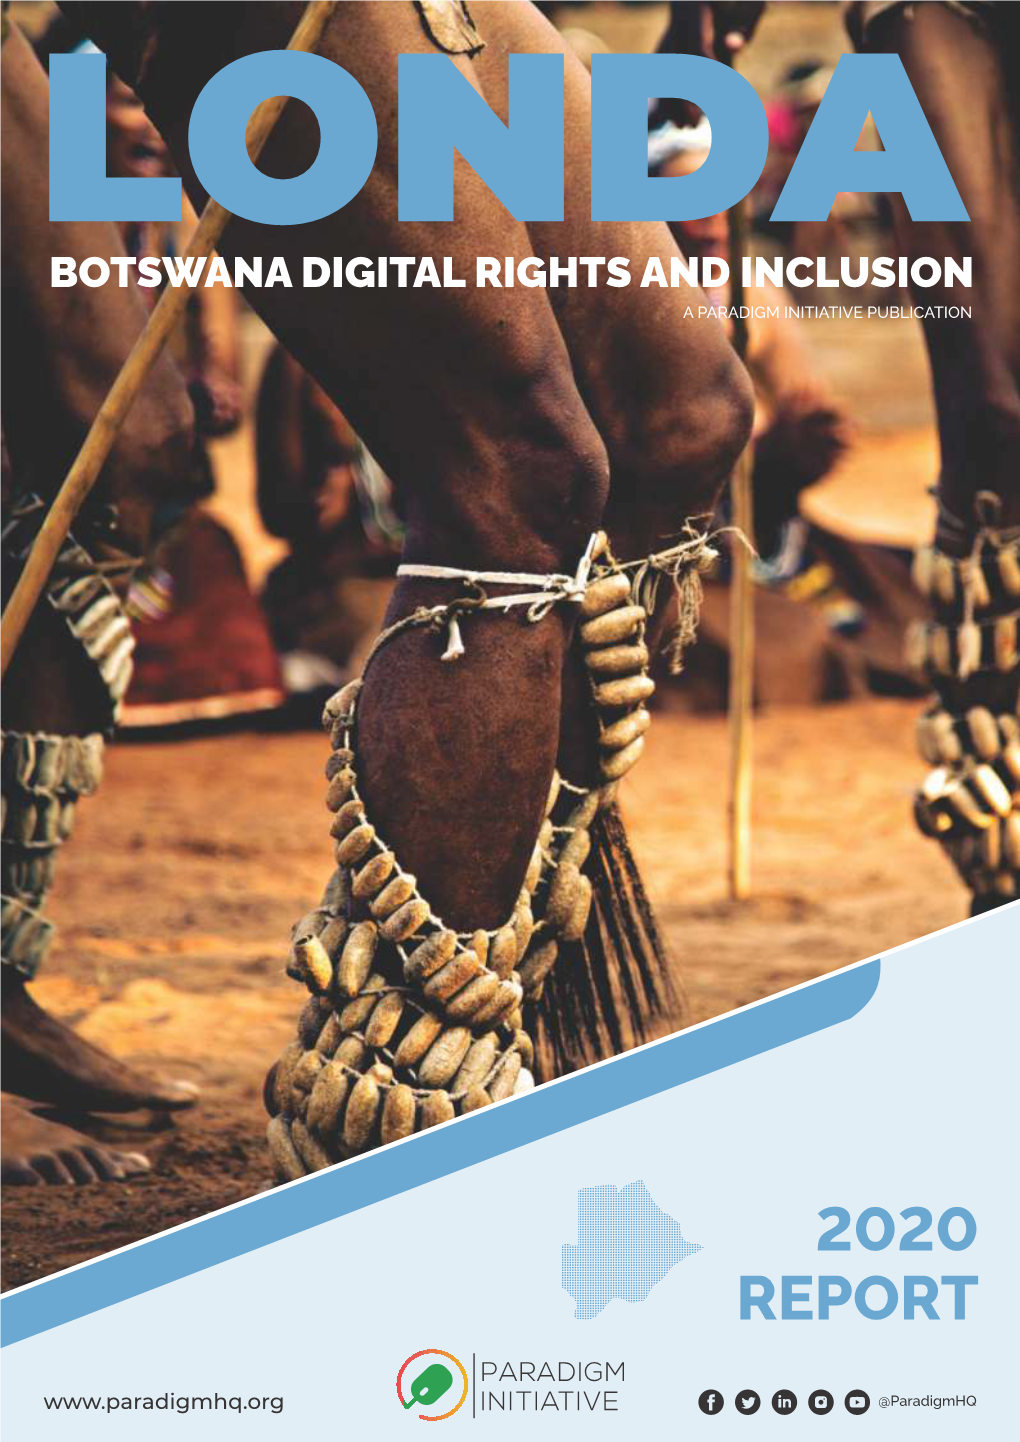 Botswana Digital Rights & Inclusion 2020 Report.Cdr